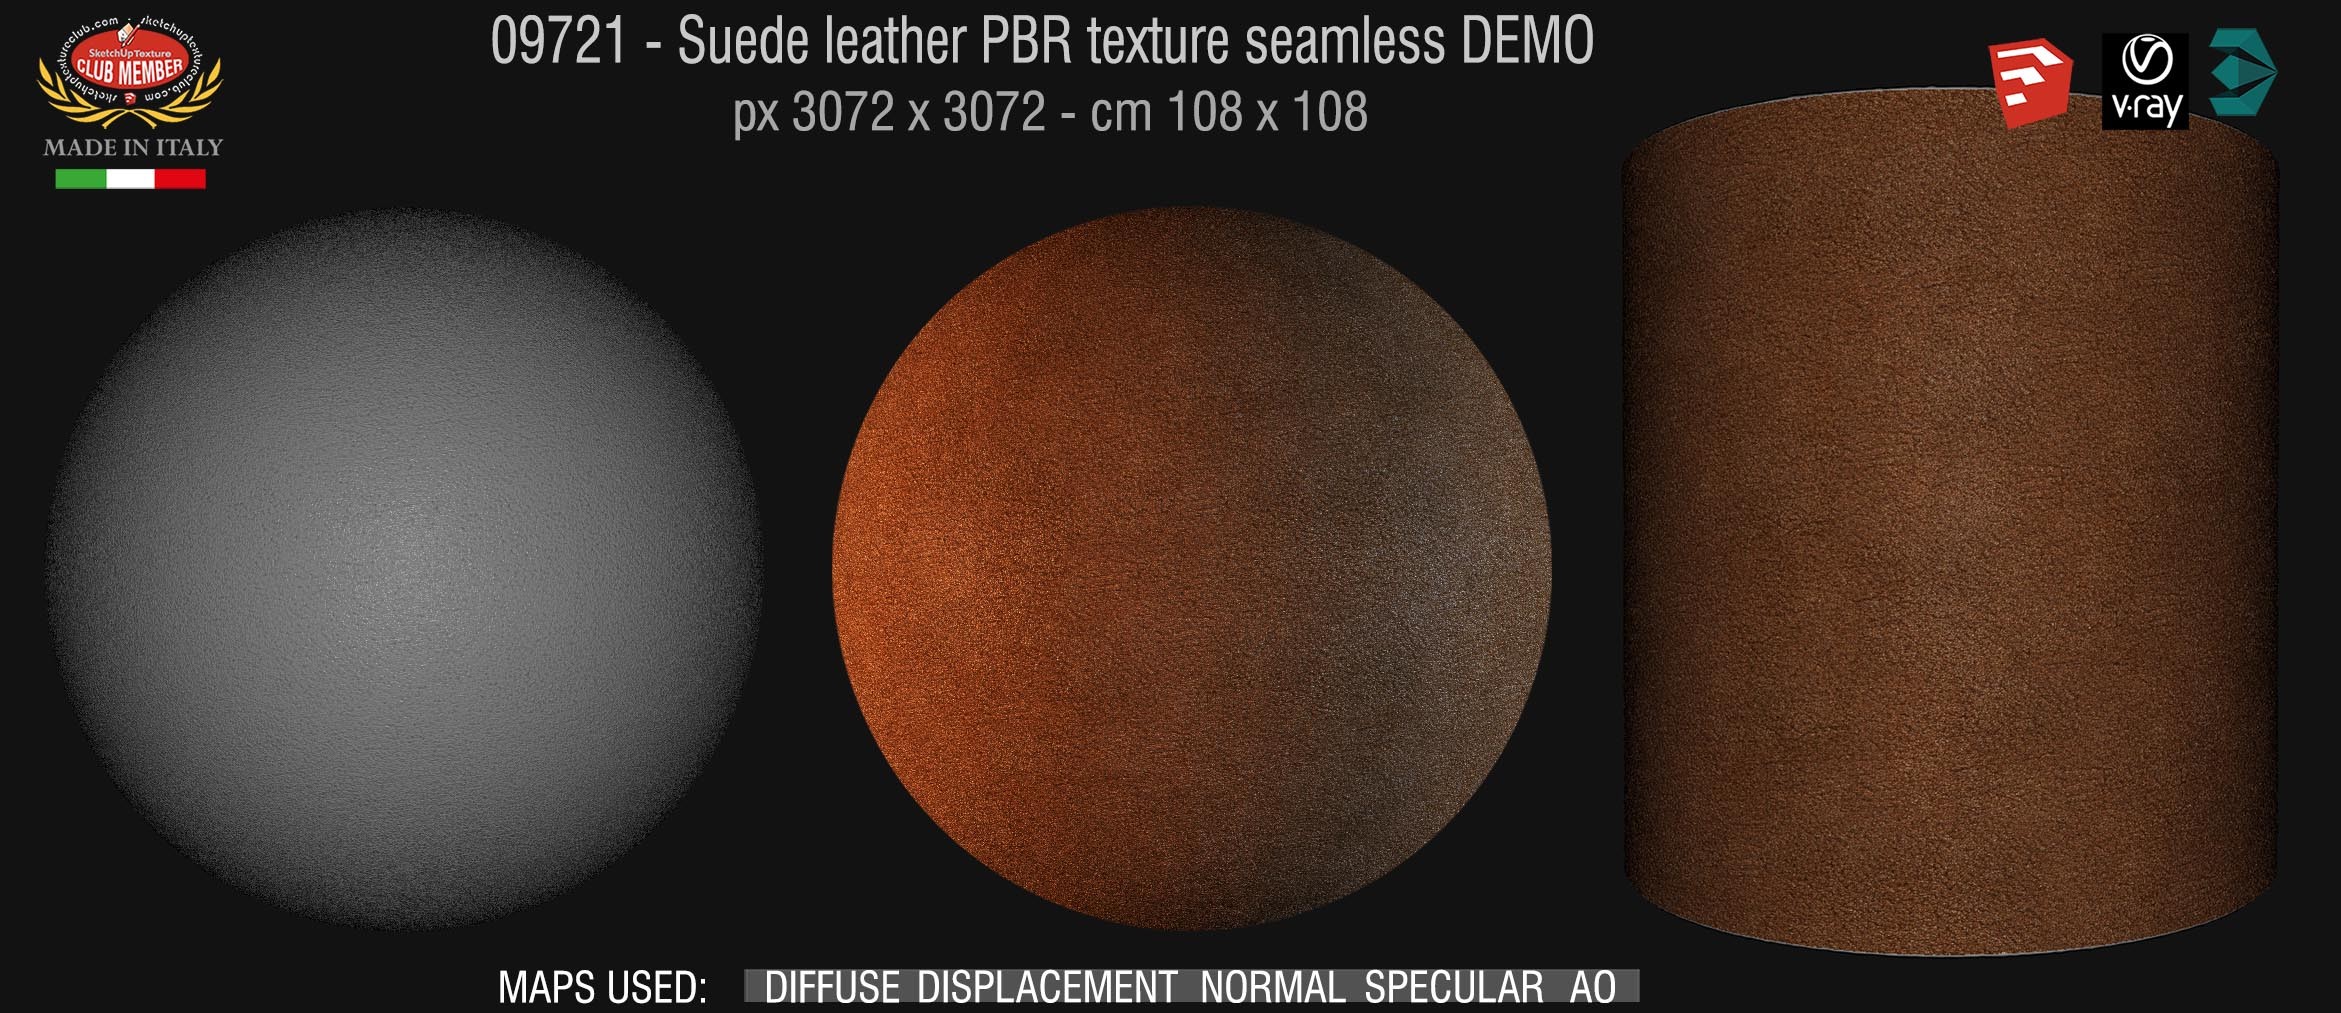 09721 Suede leather PBR texture seamless DEMO